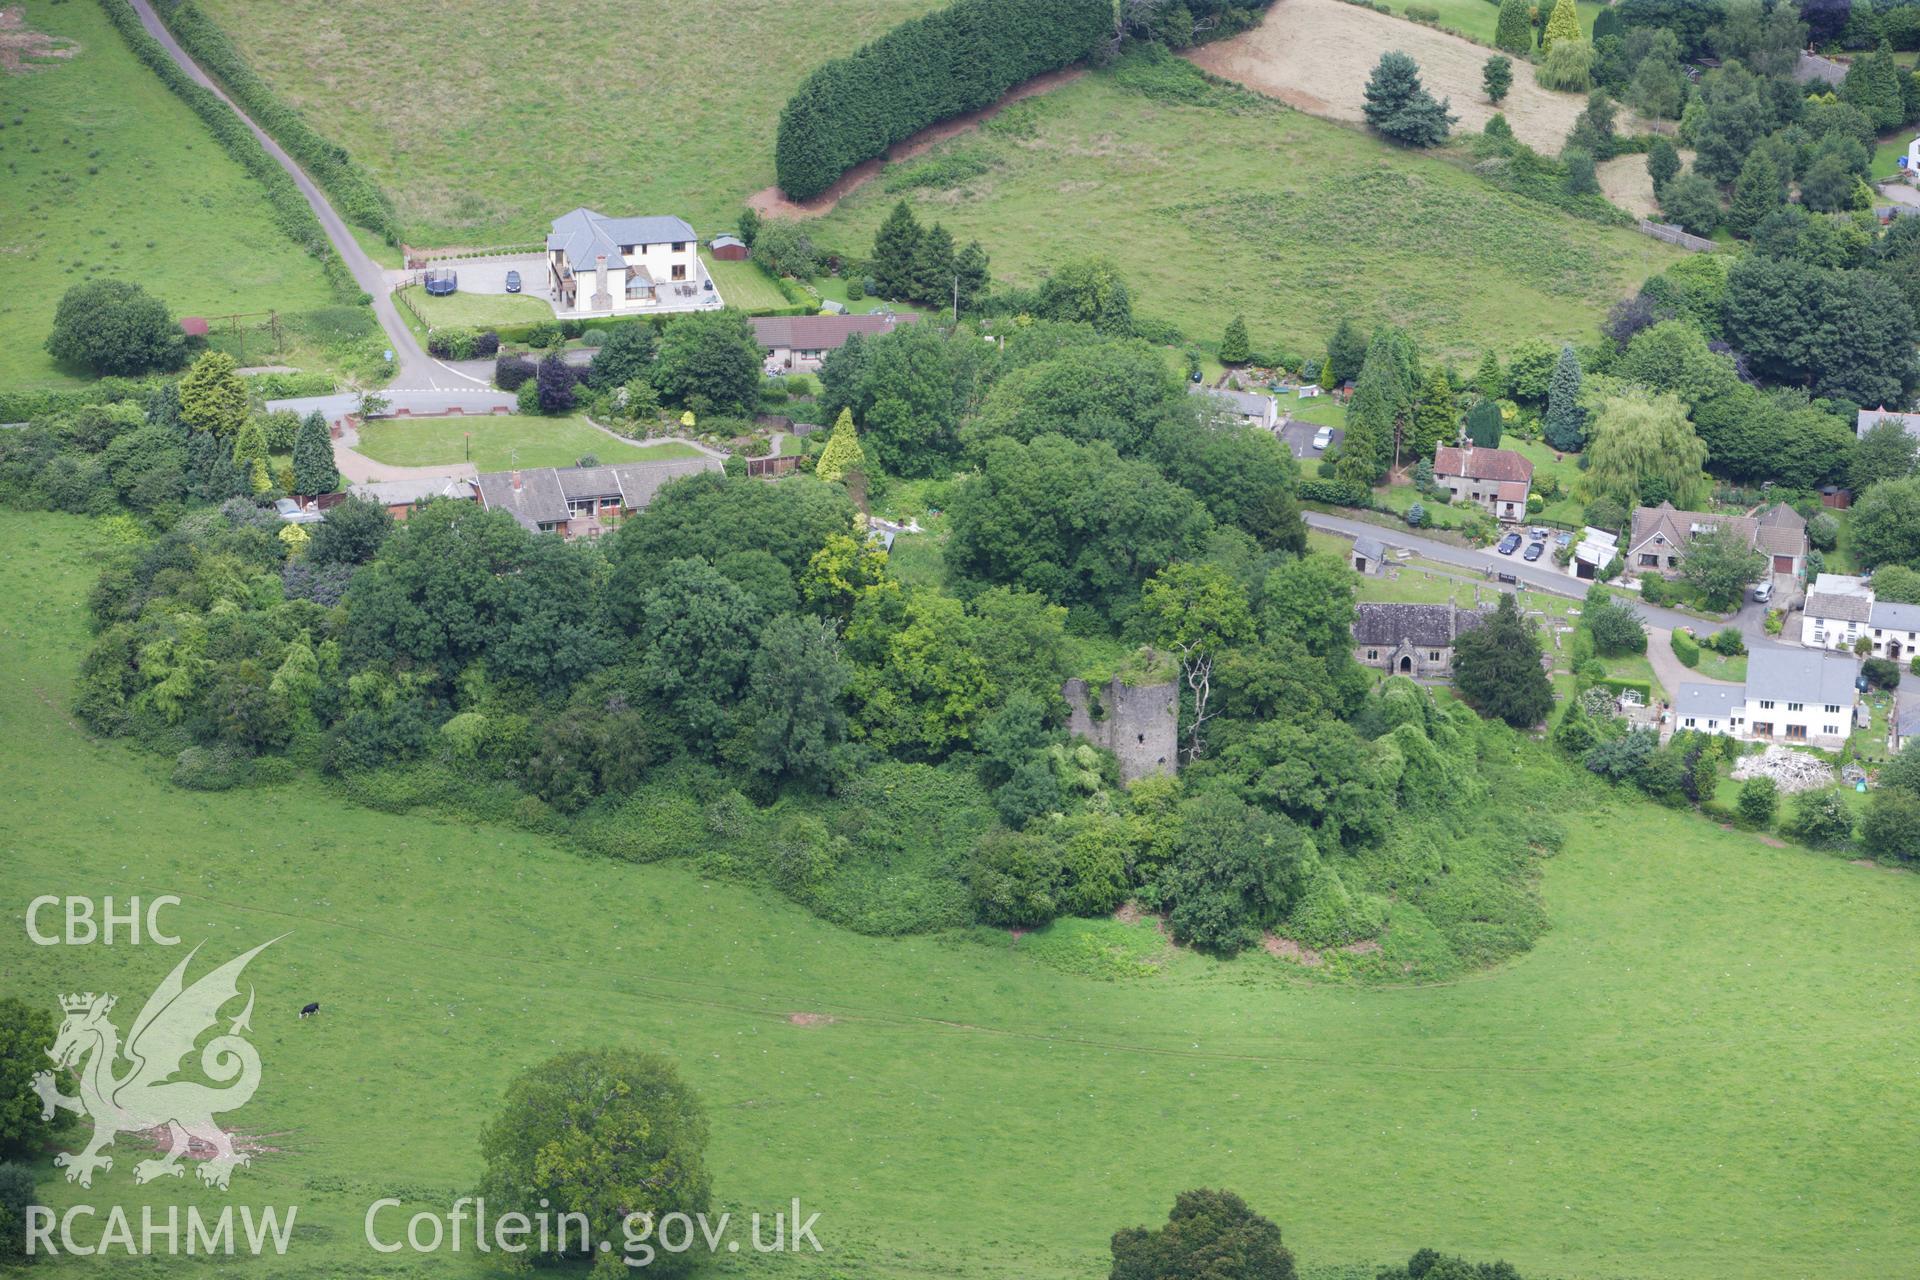 RCAHMW colour oblique aerial photograph of Llanfair Discoed Castle. Taken on 09 July 2009 by Toby Driver